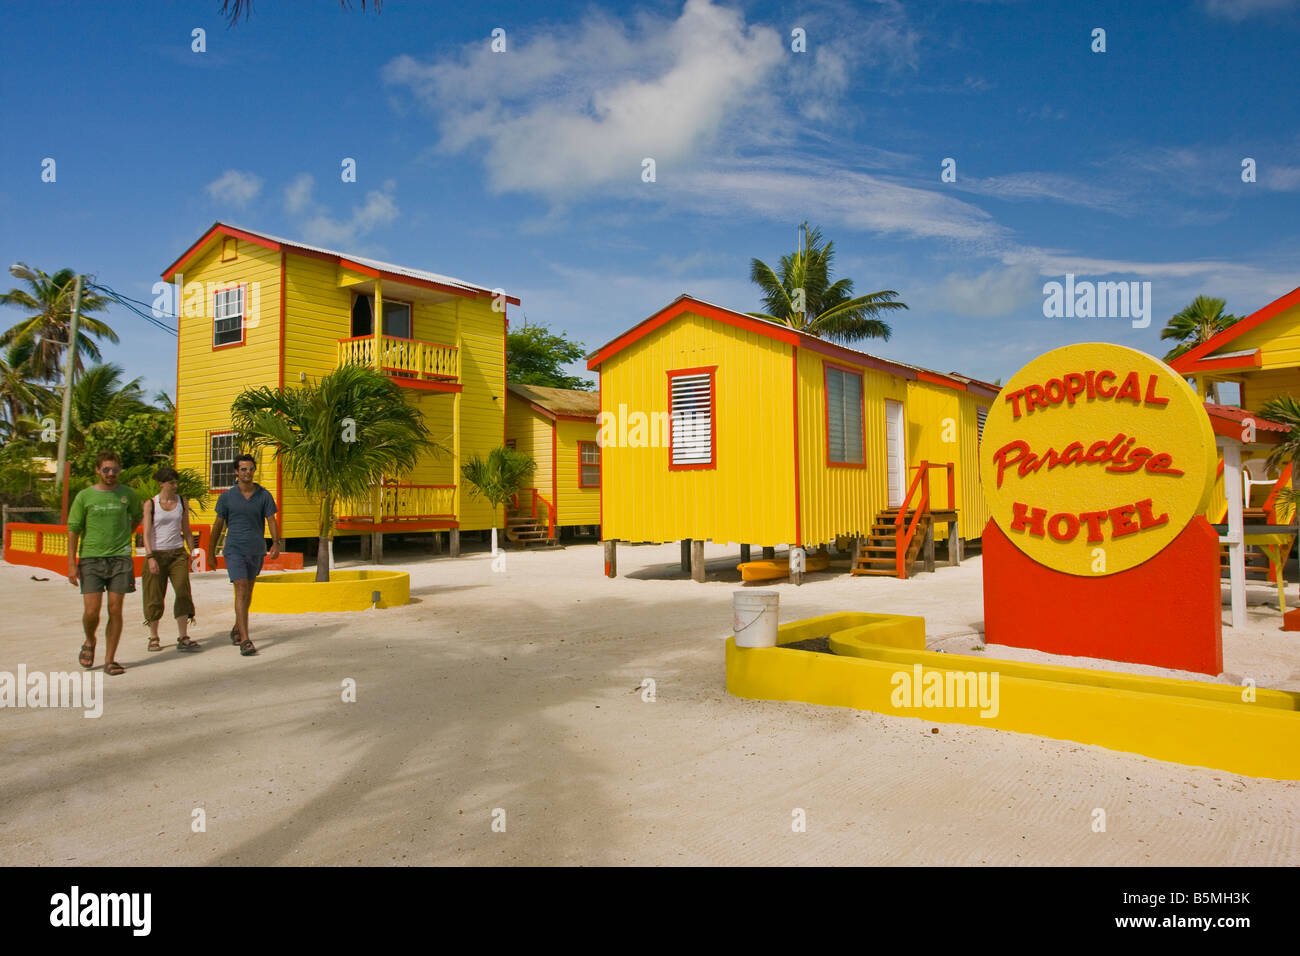 CAYE CAULKER BELIZE - Tourists walk by the Tropical Paradise Hotel on the beach. Stock Photo